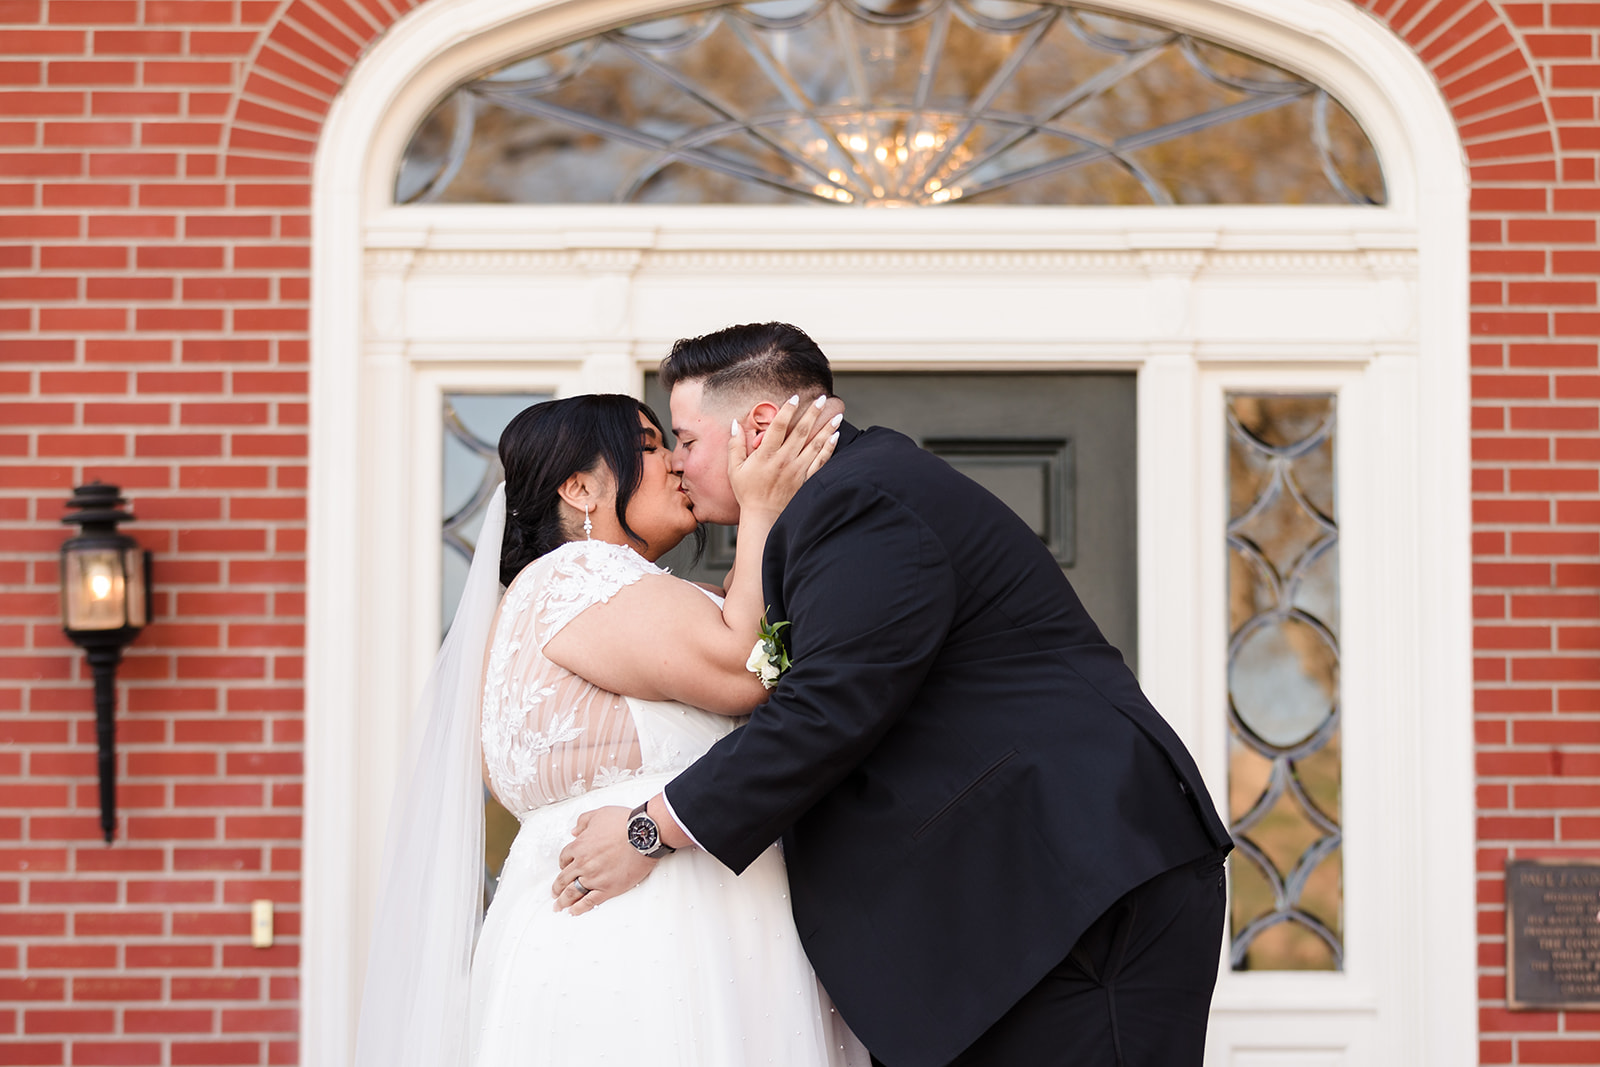 Bride and groom share first kiss at the end of their wedding ceremony